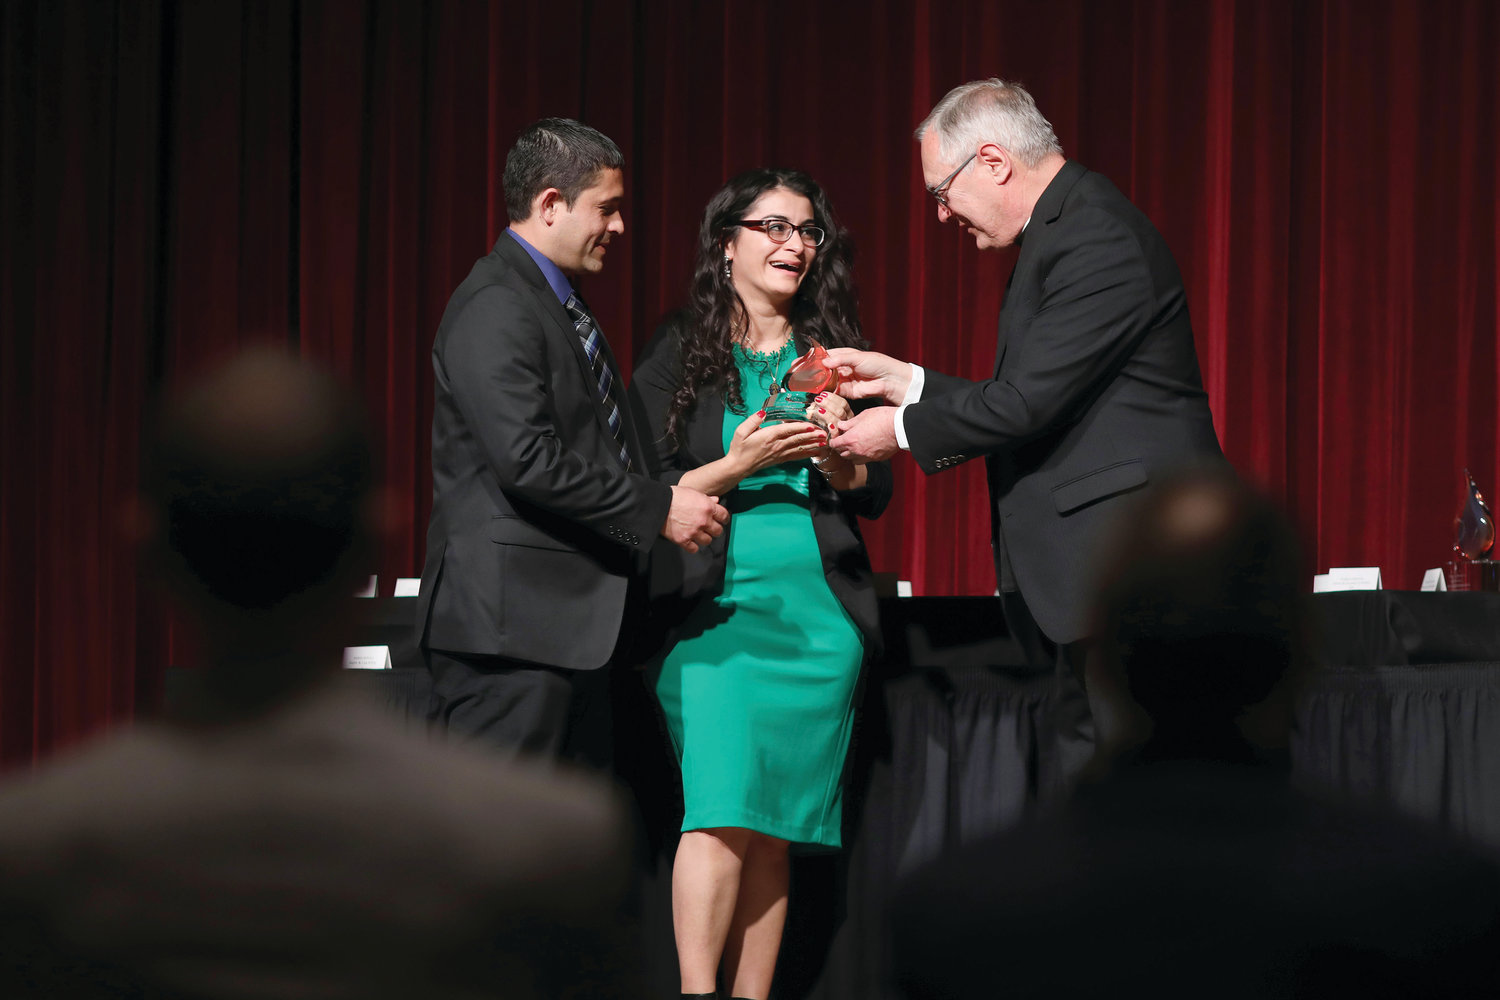 Bishop Thomas J. Tobin presents a Lumen Gentium Award to Sonia Aldana and Rony Morales in the category of Respect Life. The Morales are the parents of Baby Angela who was born with anencephaly and miraculously surpassed her initial medical prognosis at birth by living to the age of 3 years and 8 months. Since their daughter died in 2017 they have become strong advocates for life and for babies with disabilities.